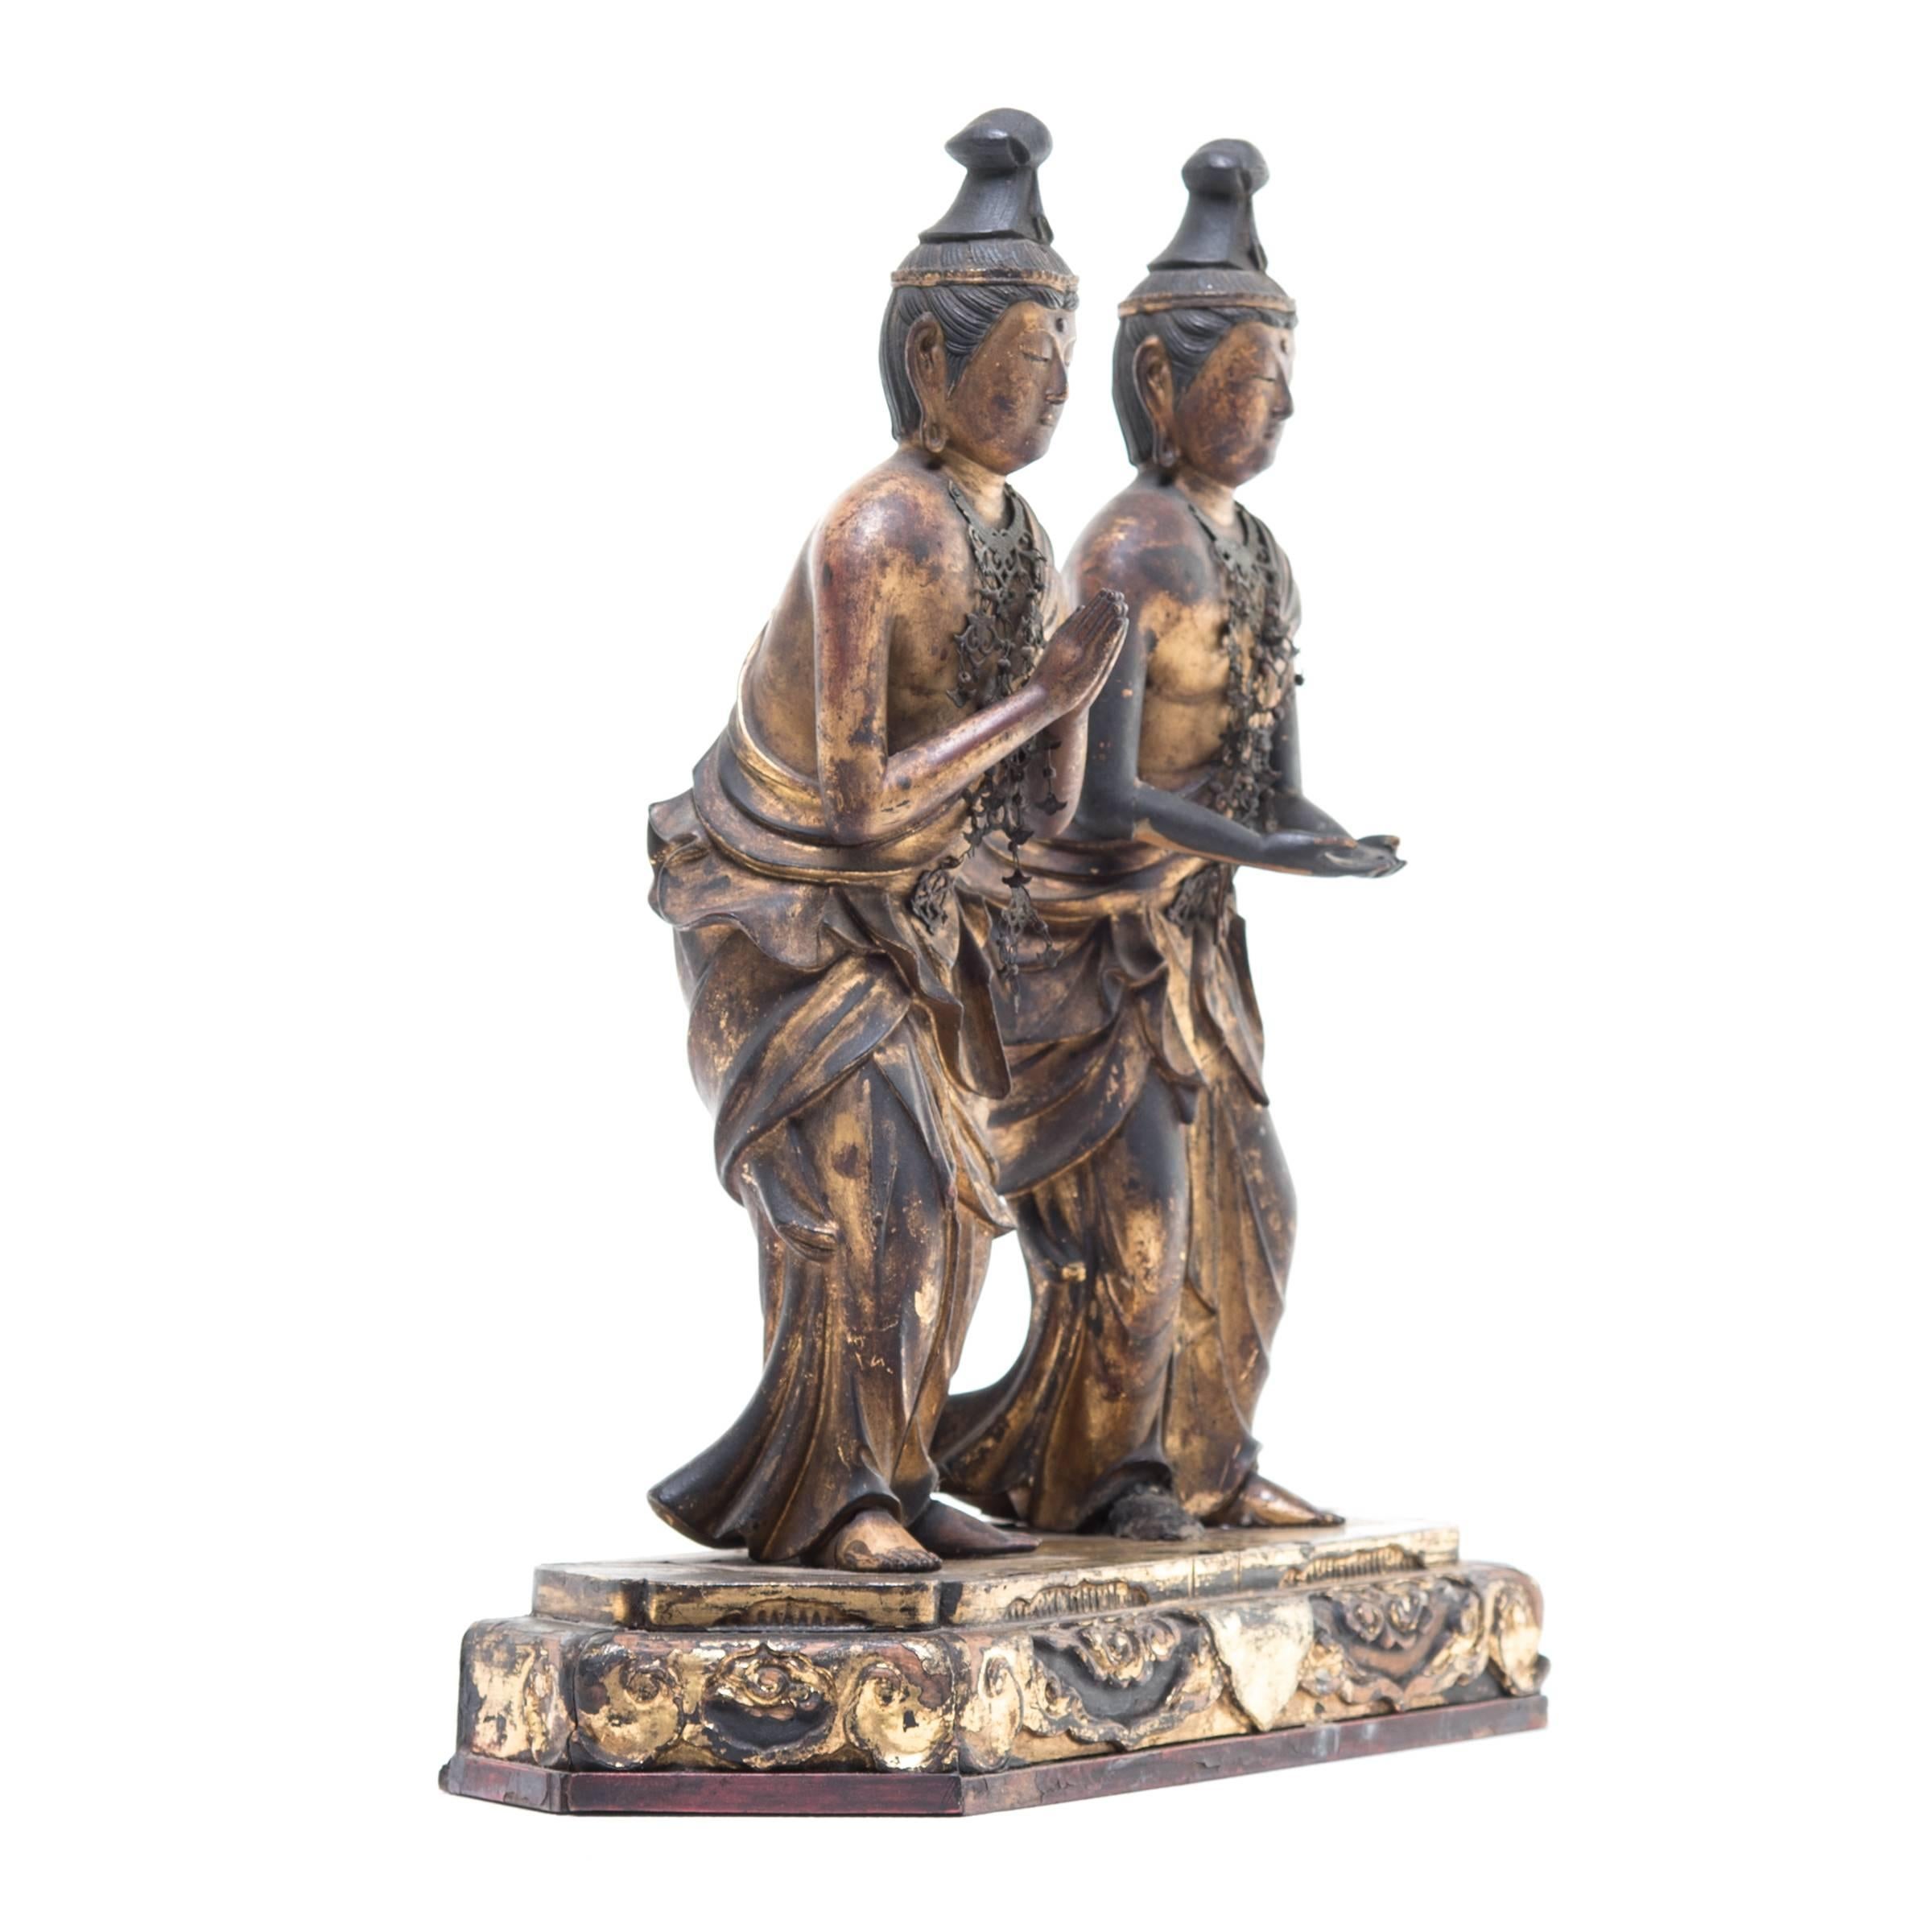 It is unusual to see two majestic carved Buddha figures mounted together. Each of the pair is in a different mudra position: One offering and the other blessing. Both are intricately carved with serene expressions, flowing robes, elaborate necklaces